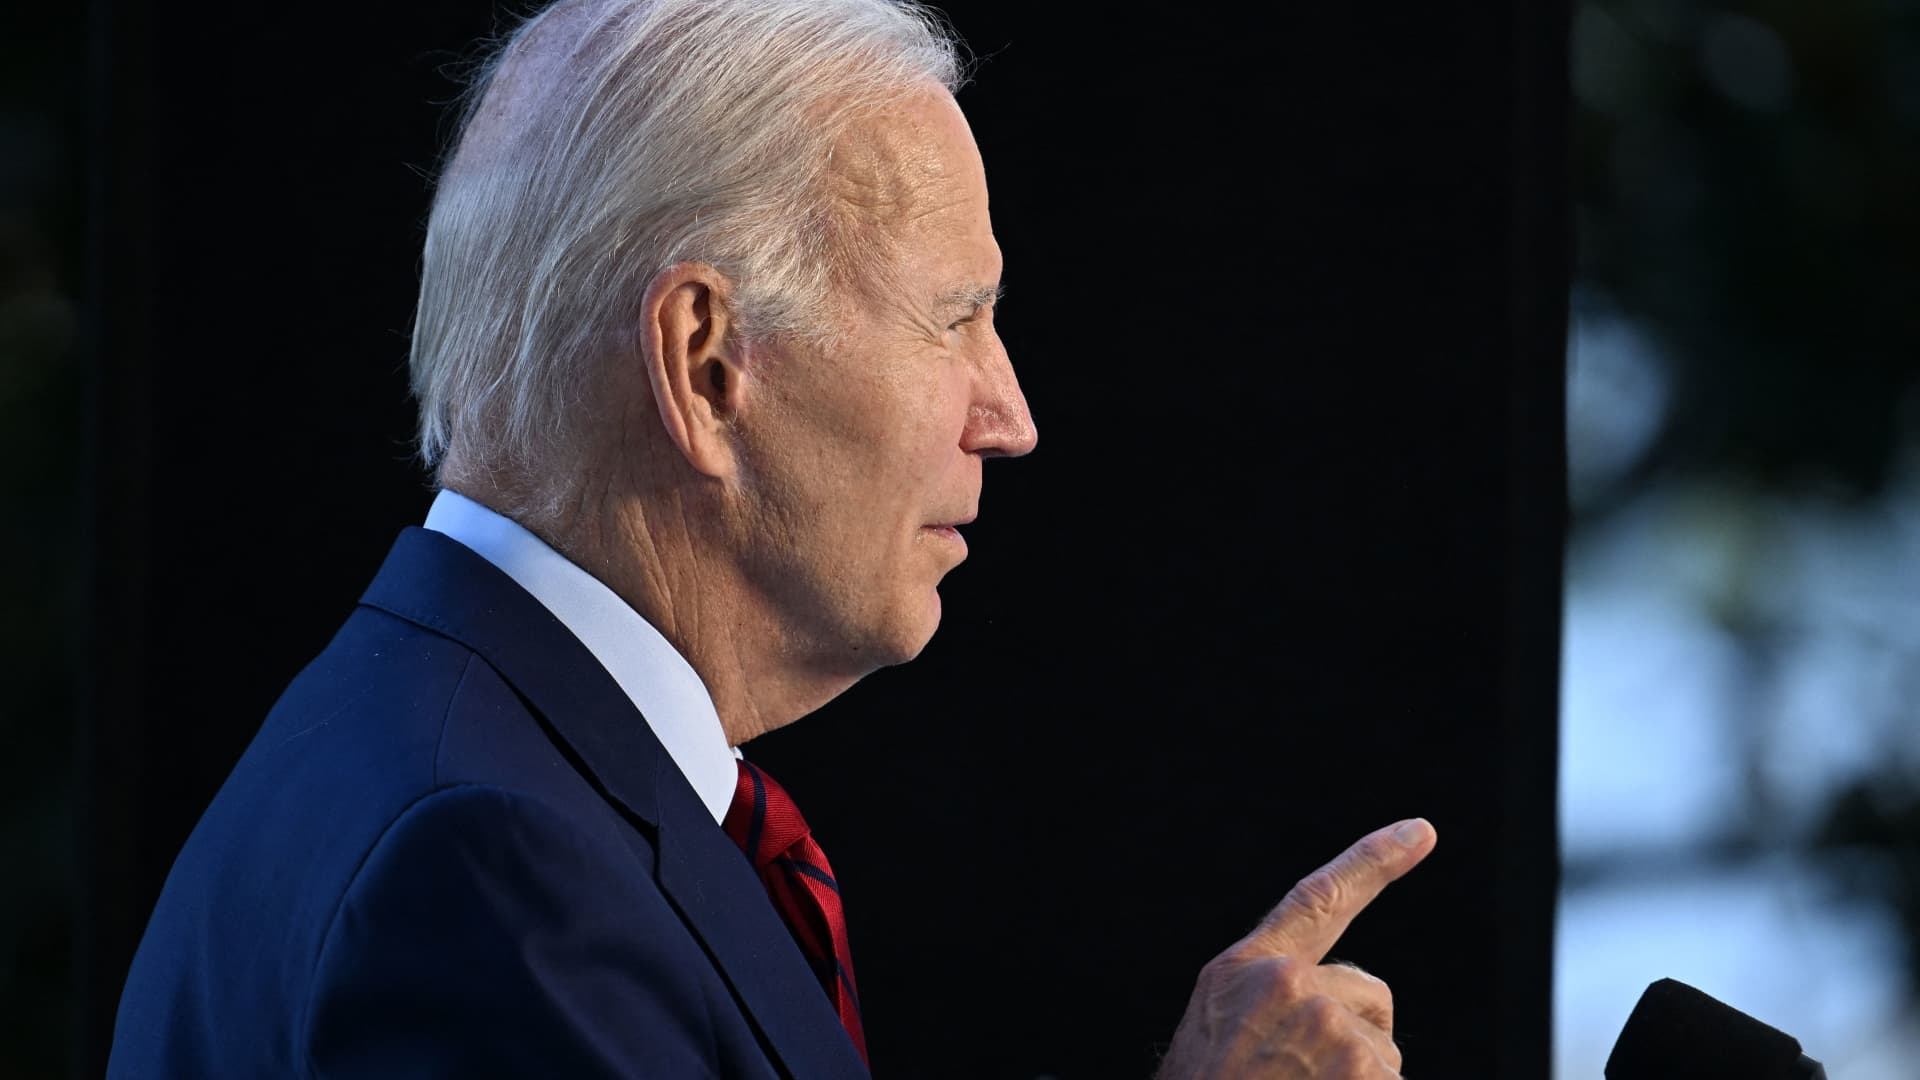 President Biden tests negative for Covid-19, will continue isolation despite feeling 'very well'